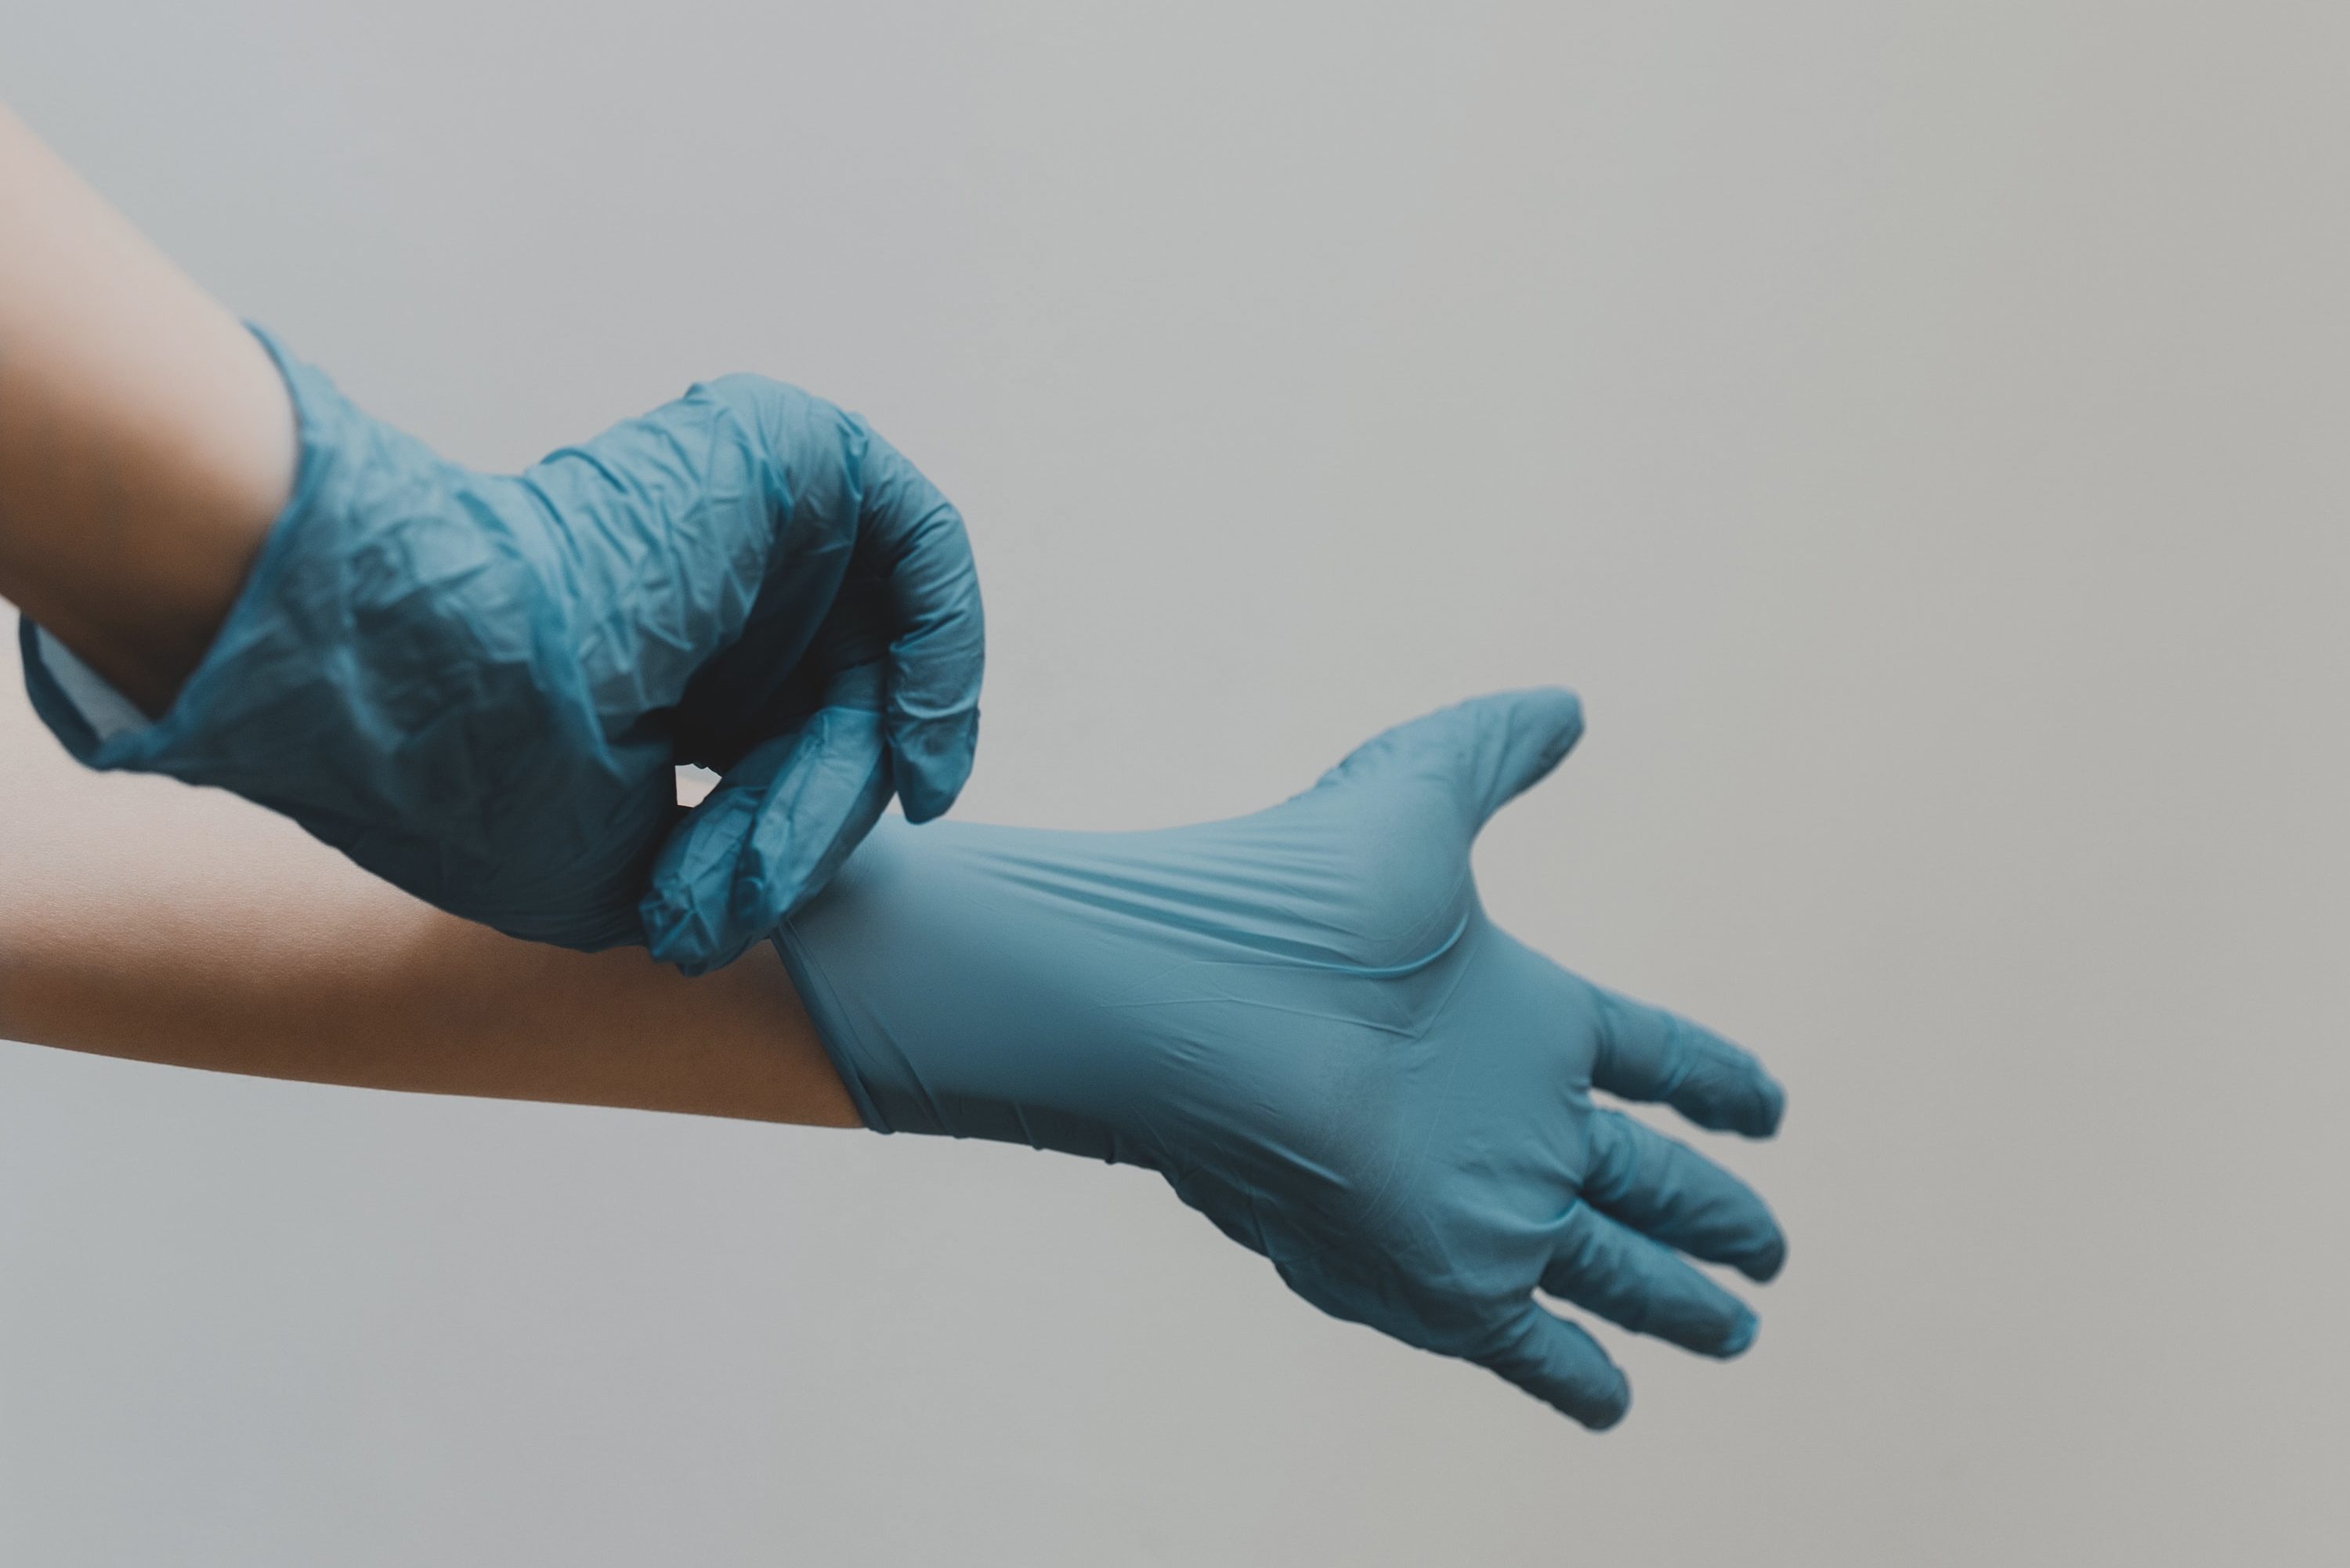 Wearing Gloves to Protect Against Coronavirus? Here's What You're Doing Wrong